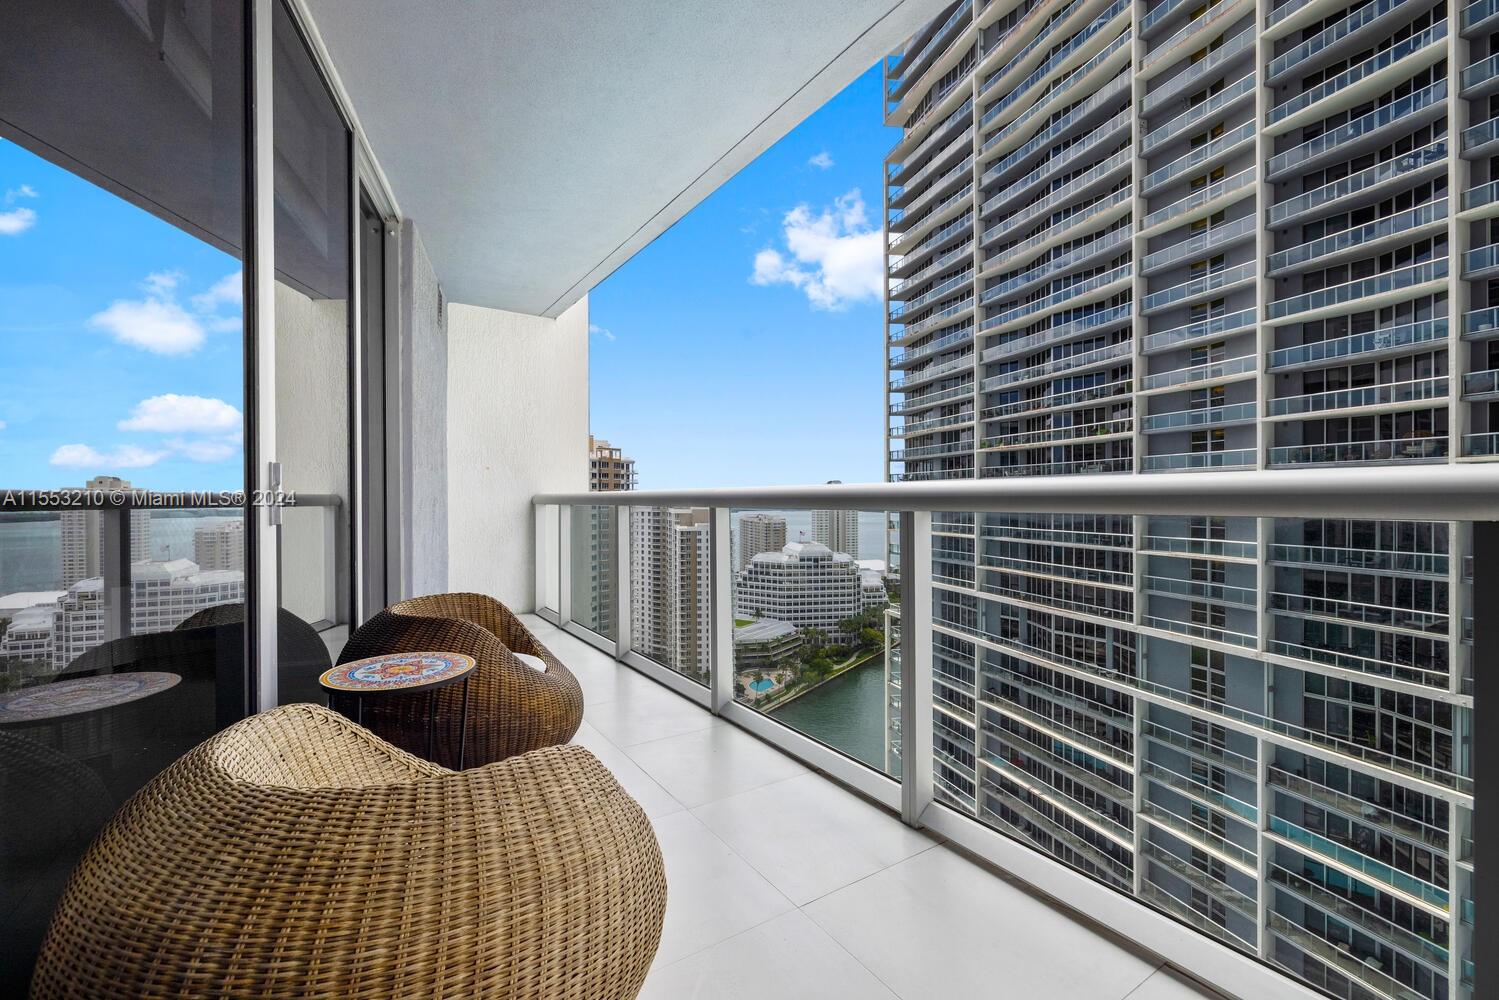 Spacious fully furnished 1 BR / 1BA Residence @ ICON BRICKELL, Tower I. Unit features Italian kitchen cabinetry, subzero and wolf appliances with water and city views. Iconbrickell offers fitness classes, water, basic cable, internet & assigned parking space included. Proof of funds/income/Job, picture ID, recent credit score and current job and tenant information must be attached with the offer.